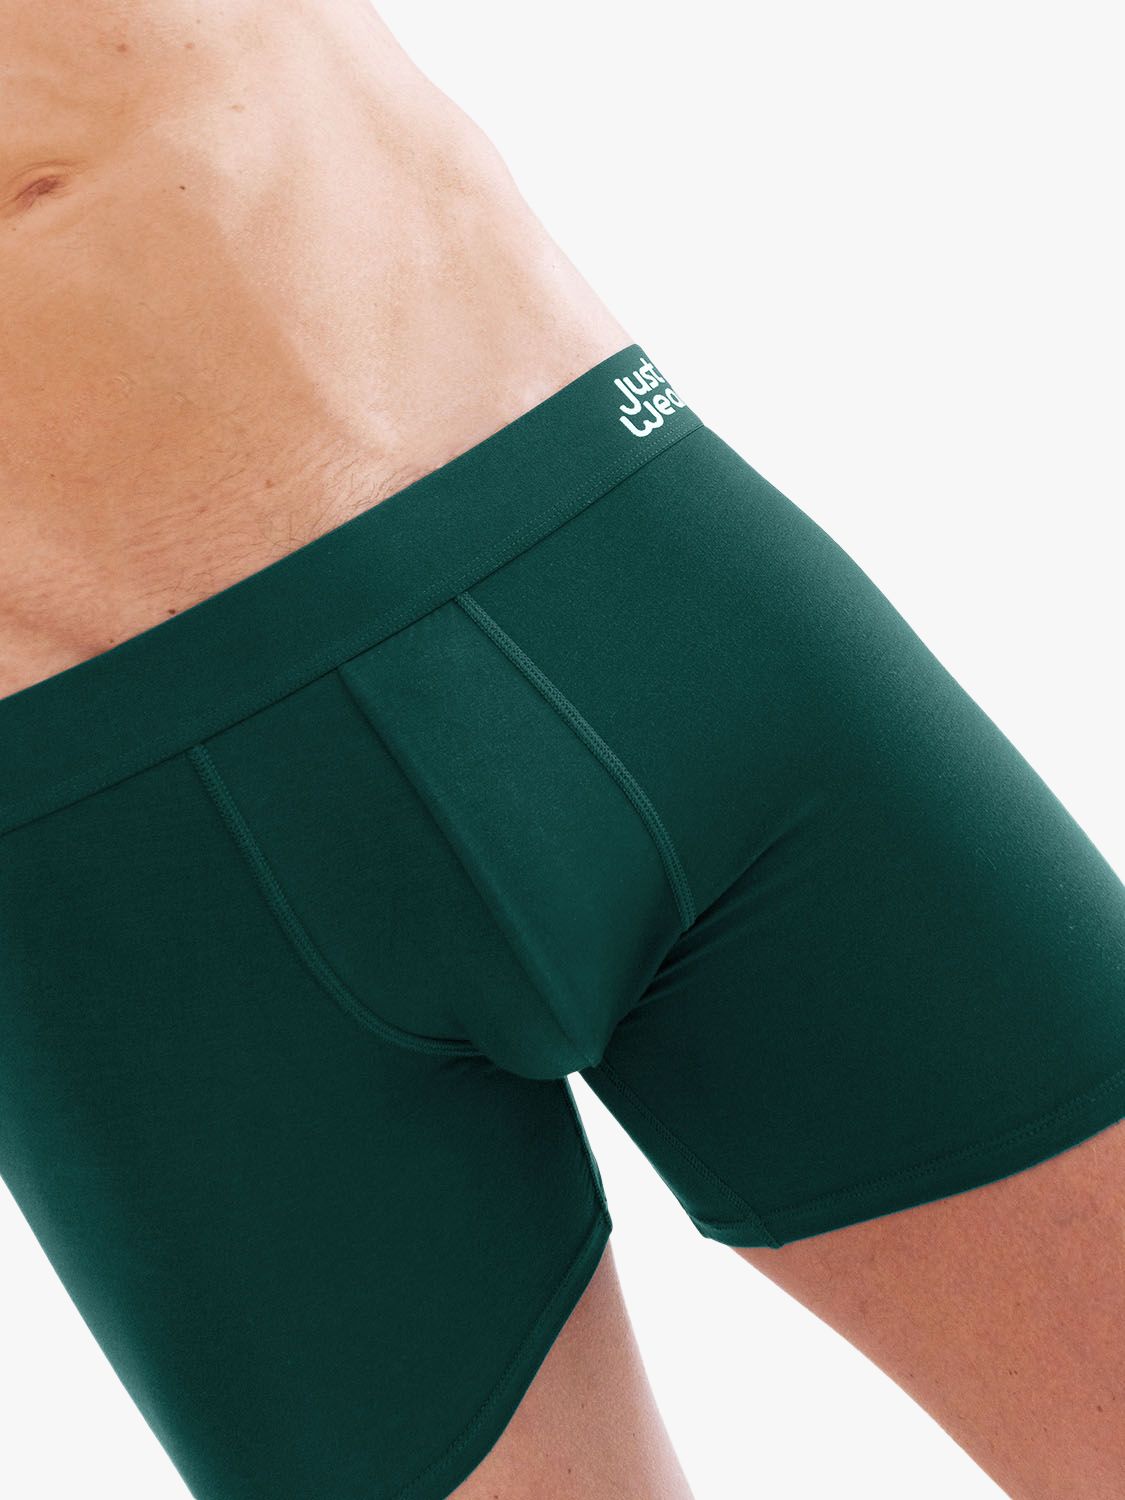 Customer reviews: Separatec Men's Cotton Boxer Briefs Pouch  Support Stretchy Underwear for a Week 7 Pack